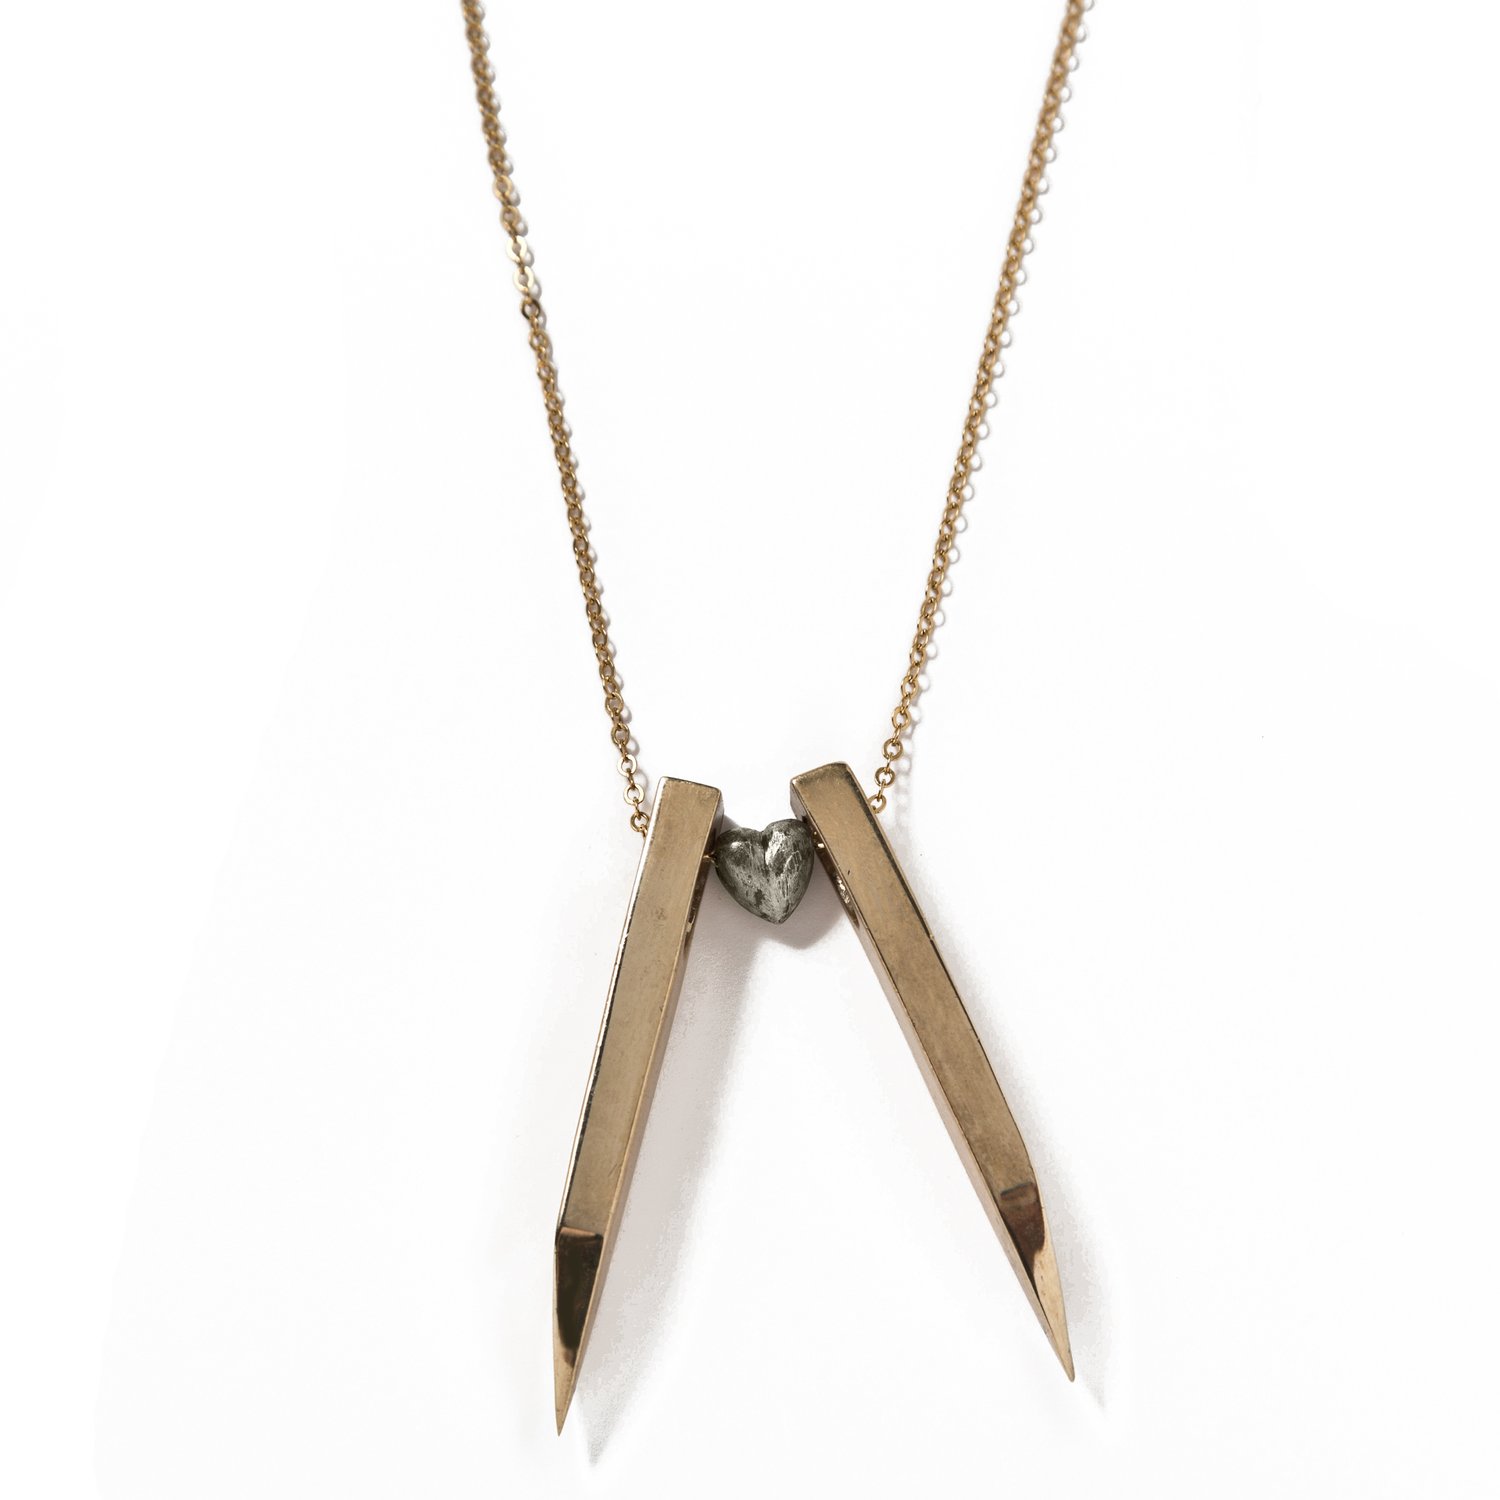 Stones & Bones NYC - Handcrafted Jewelry and Accessories Inspired by Nature